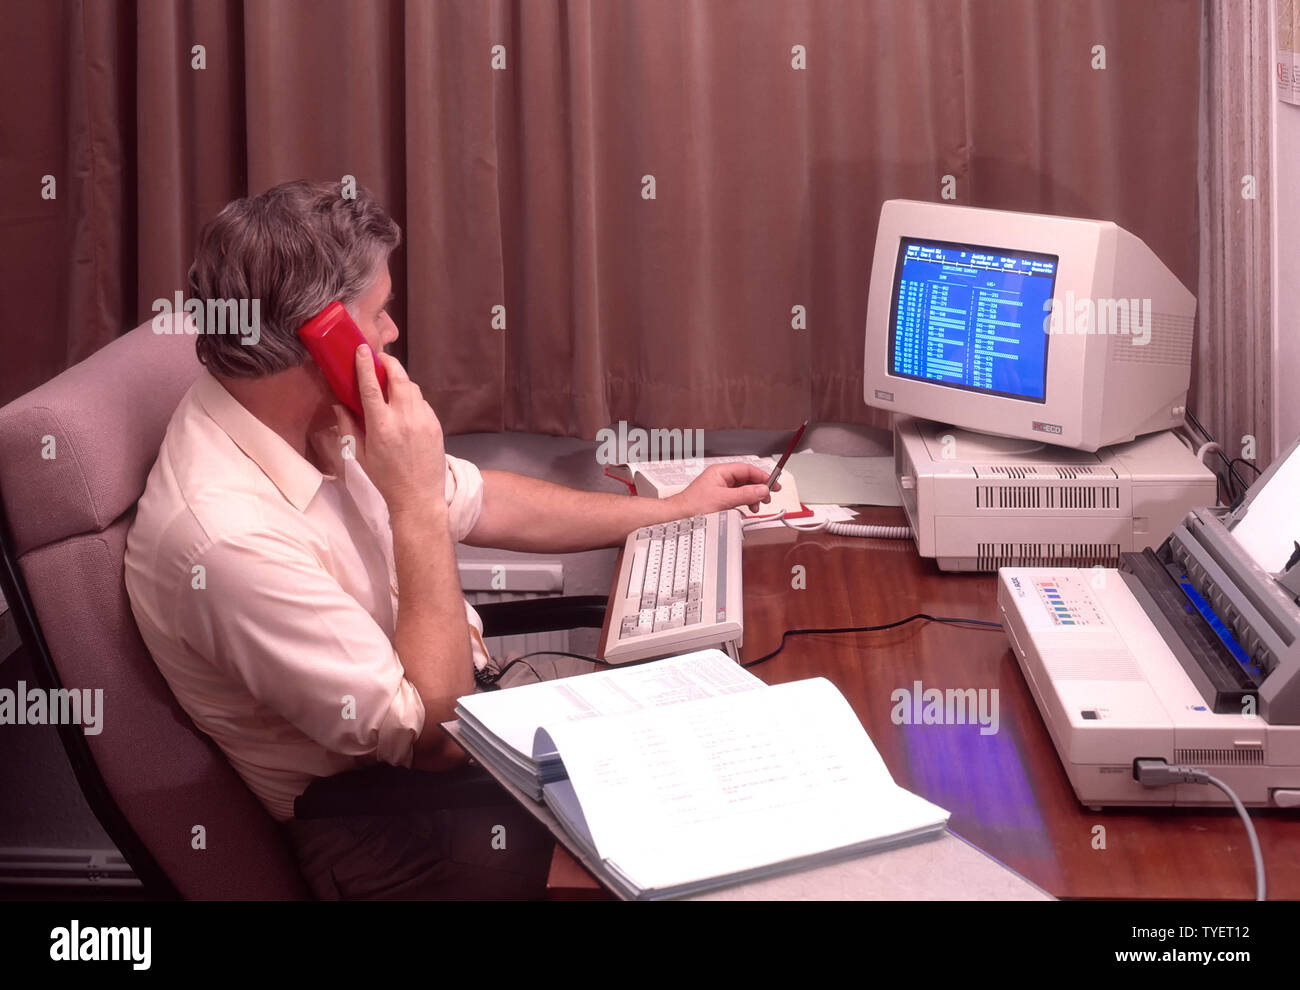 Historical 1988 archive image self employed male office worker man sitting at desk working late from home curtains drawn closed using red landline phone Amstrad desktop computer screen & printer archive 1980s the way we were WFH in England UK in the 80s Stock Photo